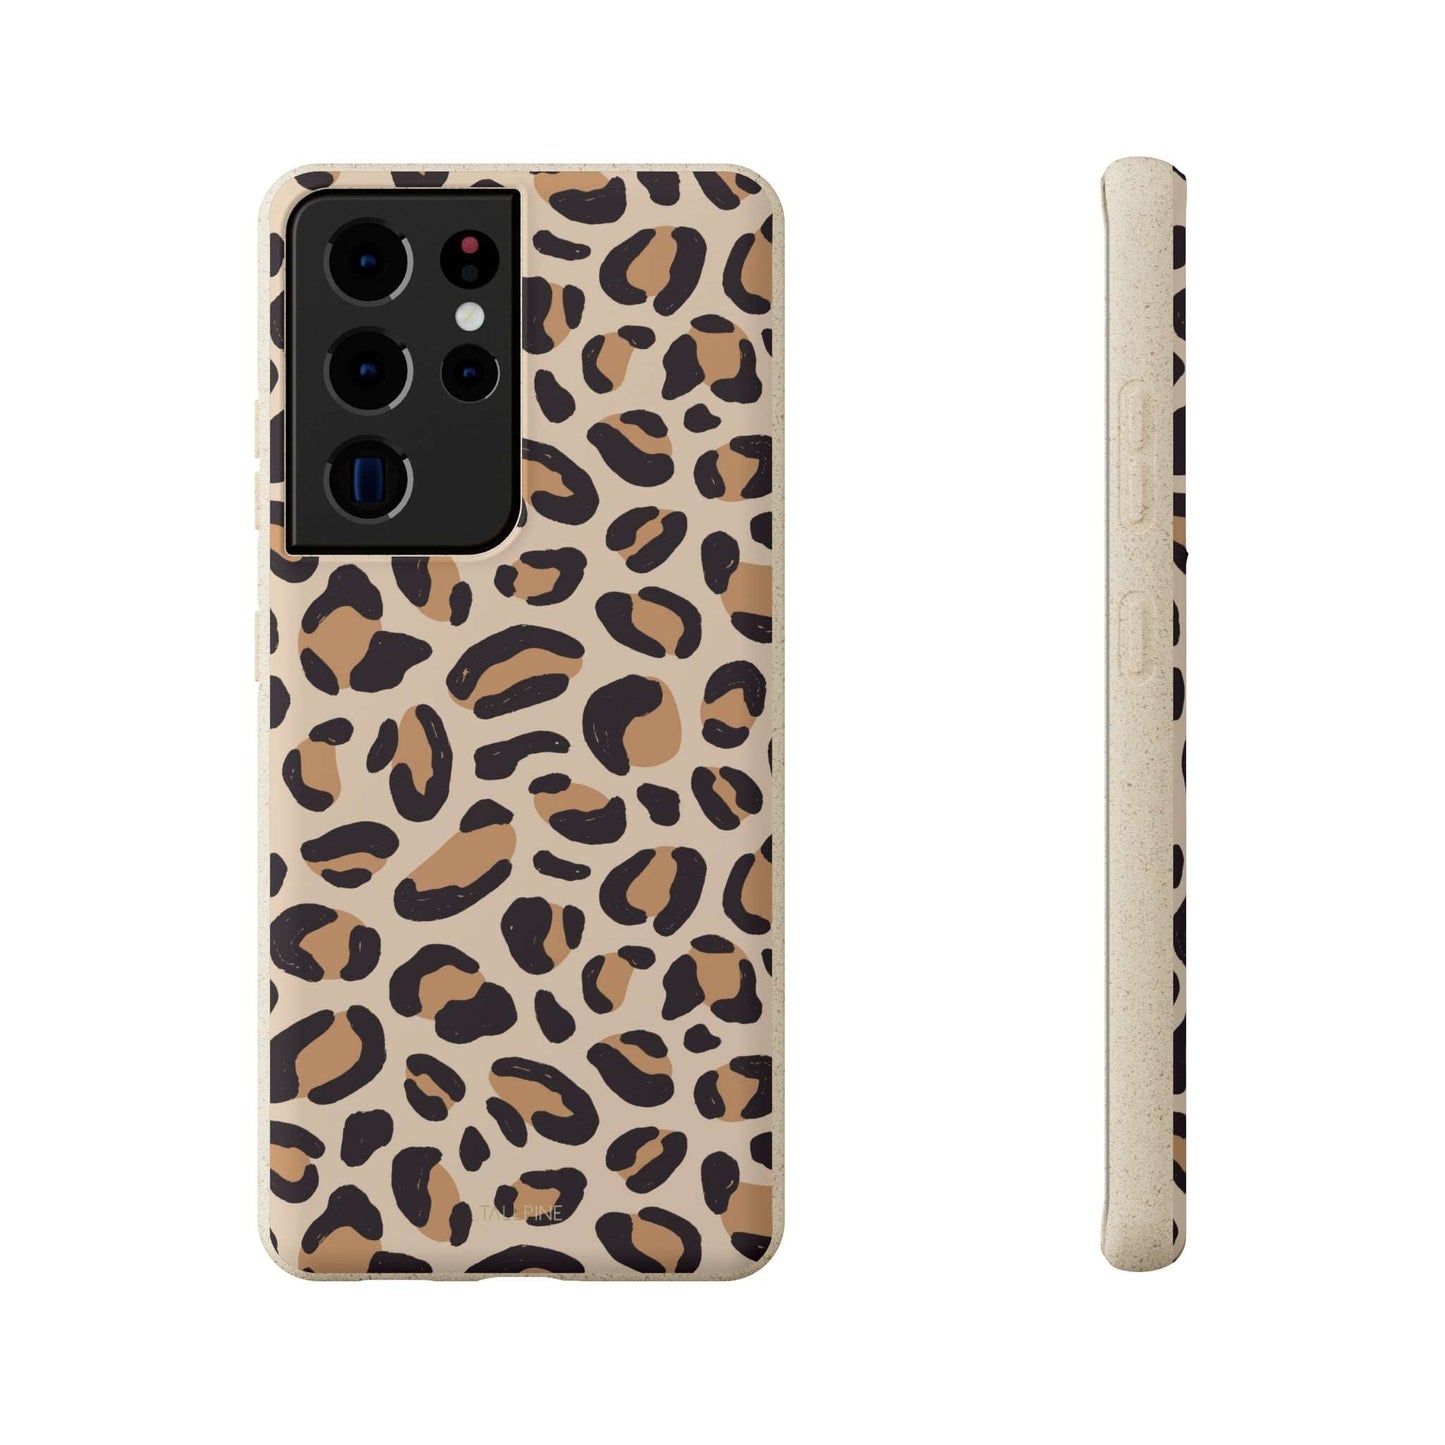 Beige Leopard - Eco Case Samsung Galaxy S21 Ultra - Tallpine | Sustainable and Eco-Friendly Phone Cases - Abstract Leopard print